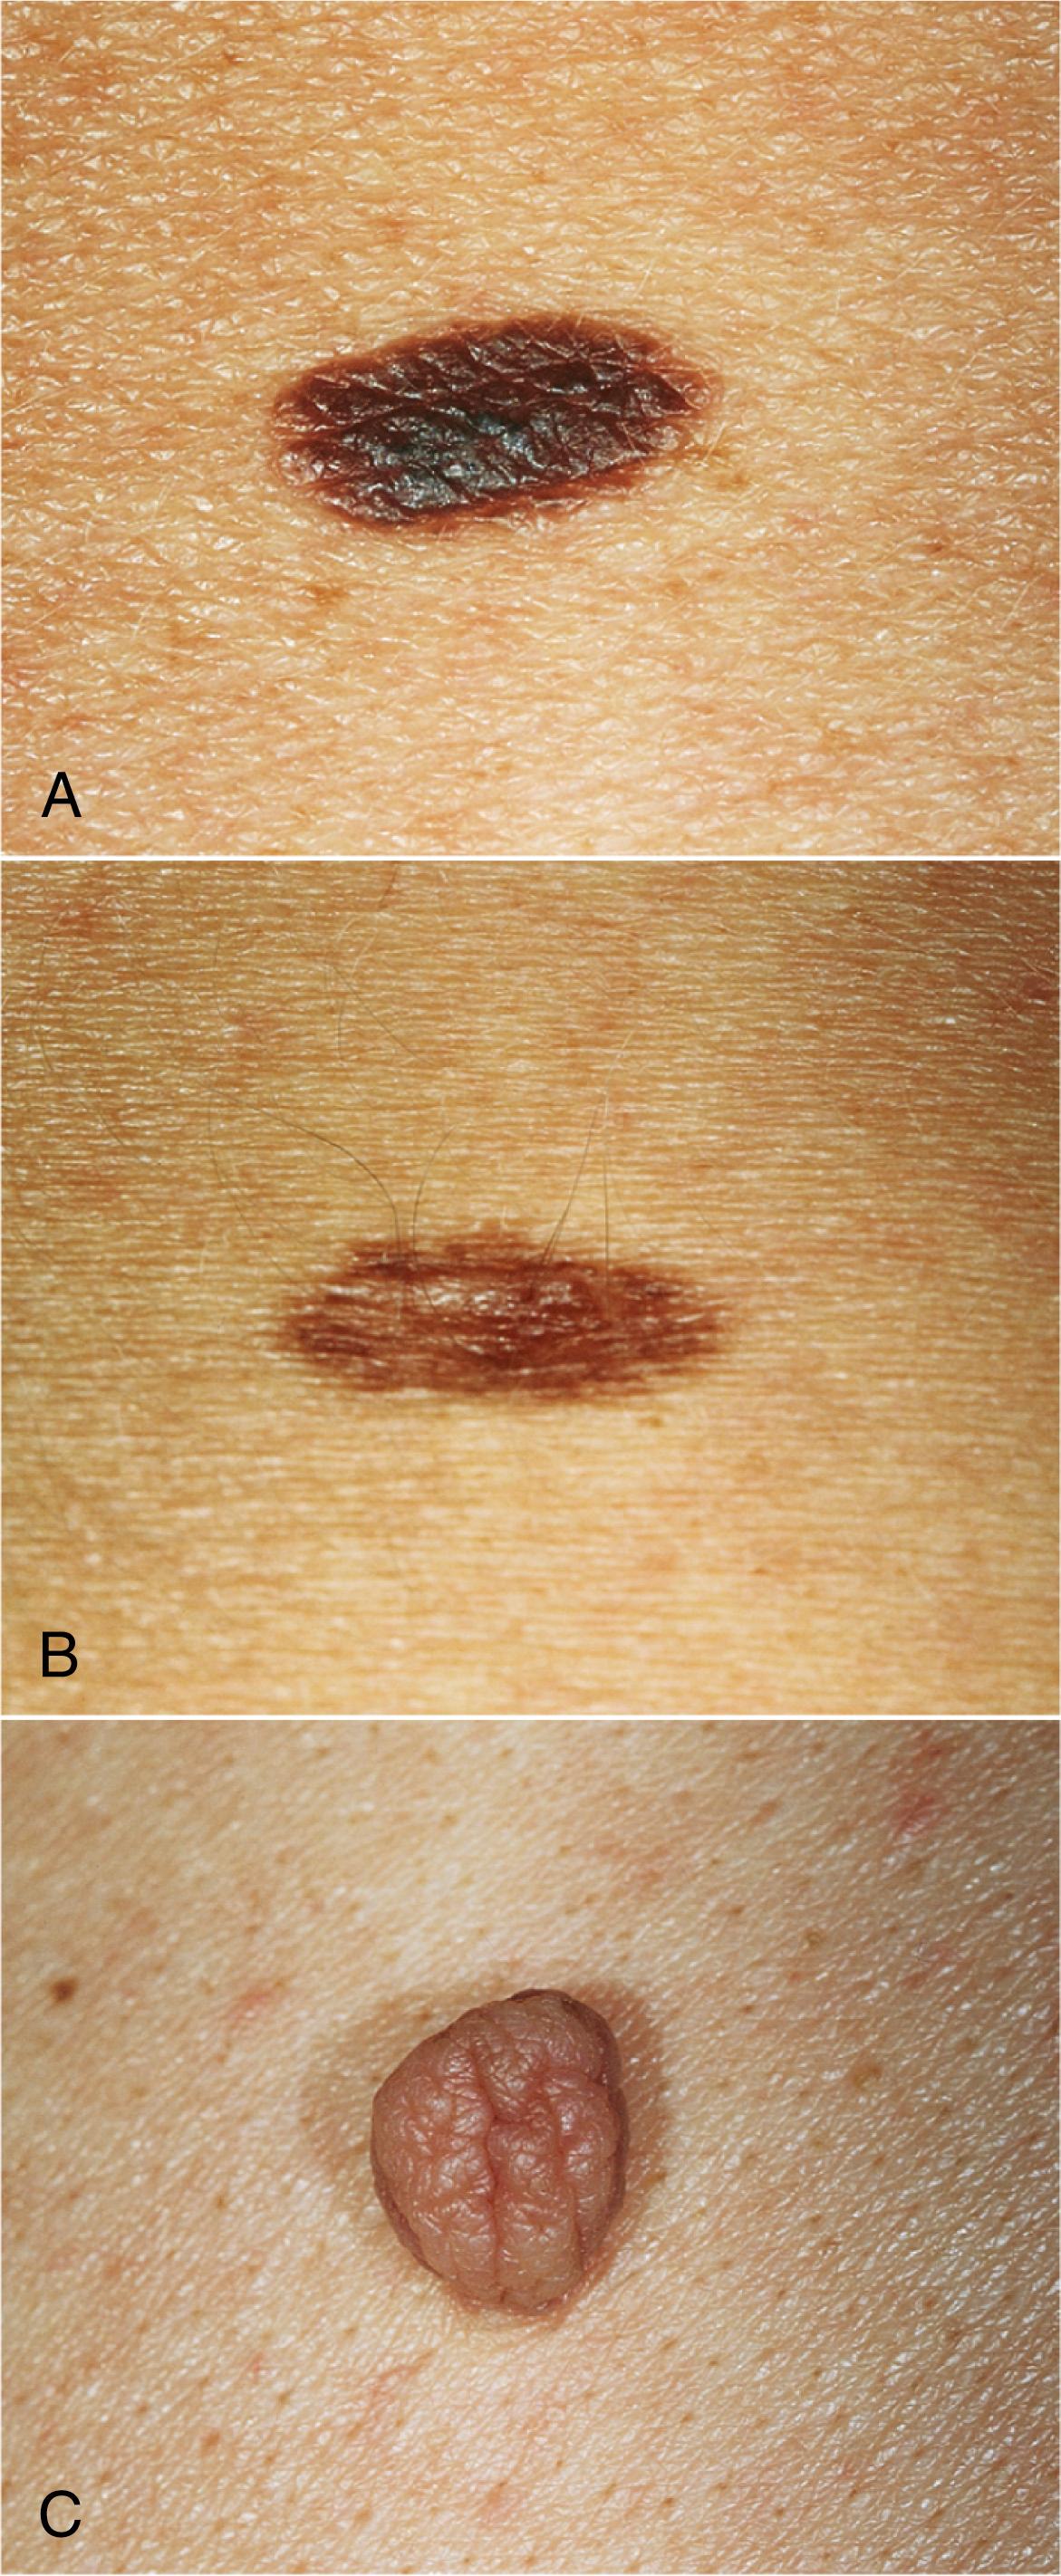 Fig. 9.5, Commonly occurring nevi.